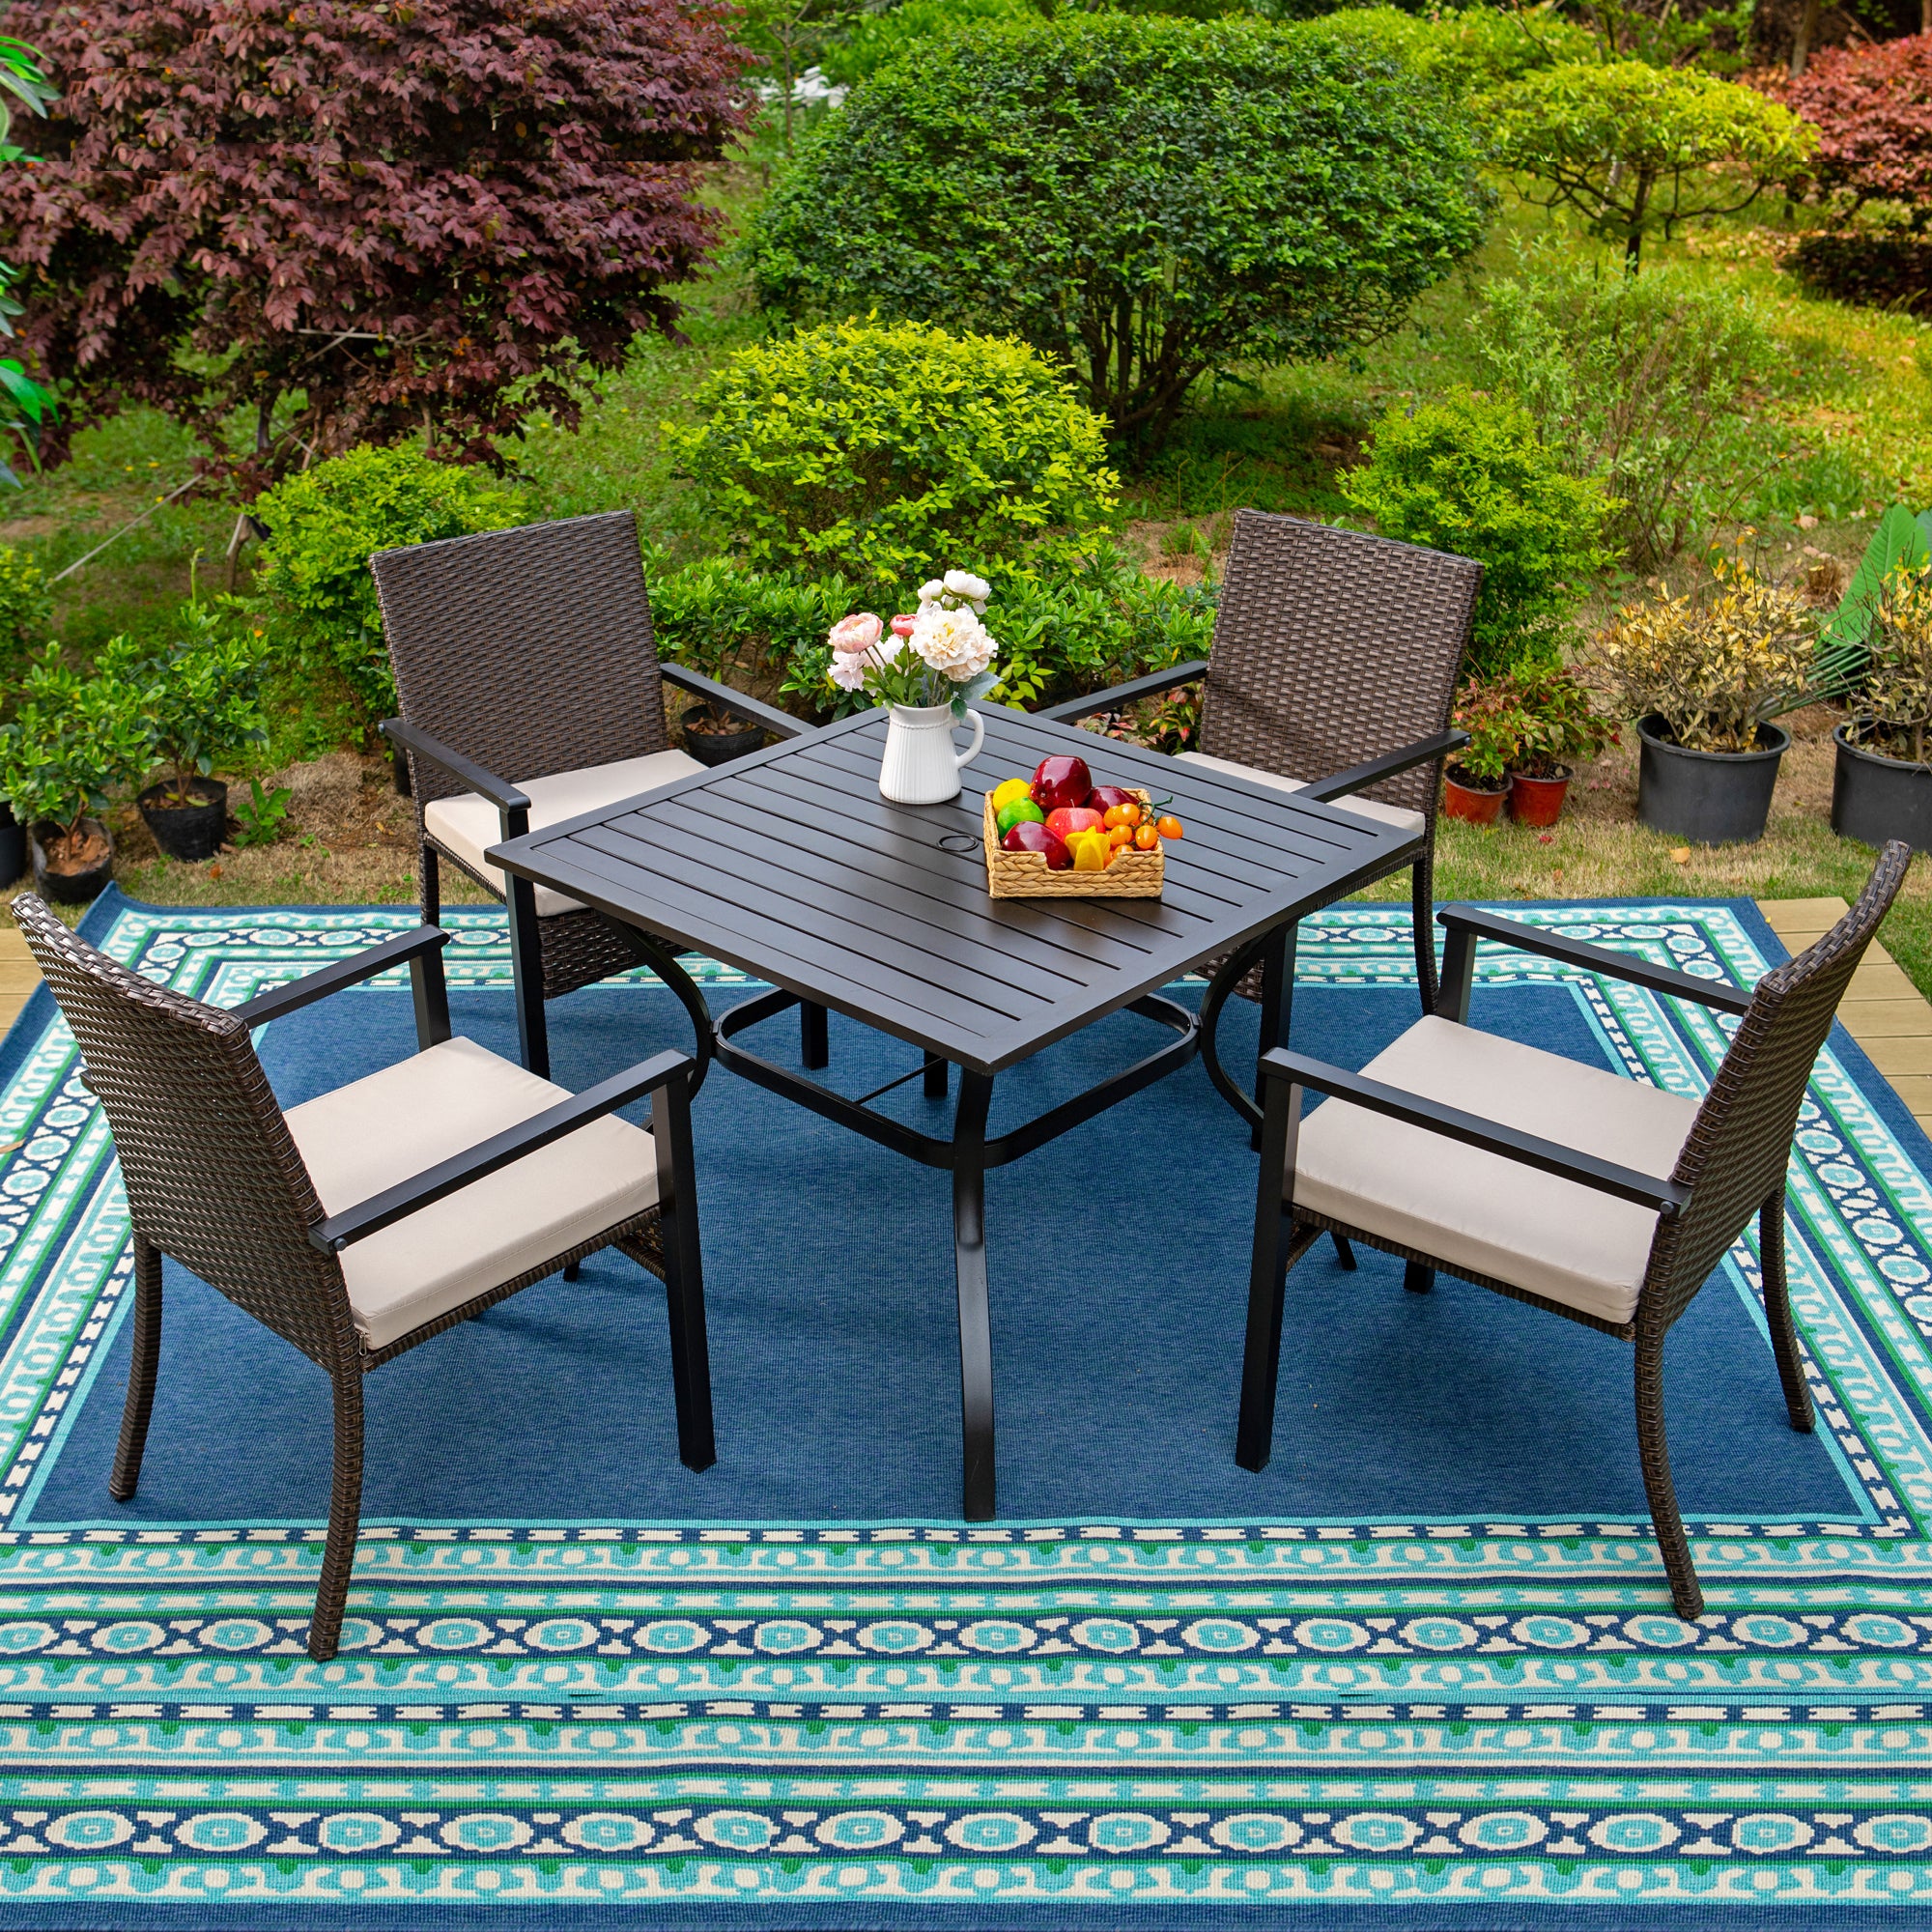 MFSTUDIO 5-Piece Steel Square Table & 4 Rattan Cushion Chairs Outdoor Patio Dining Set